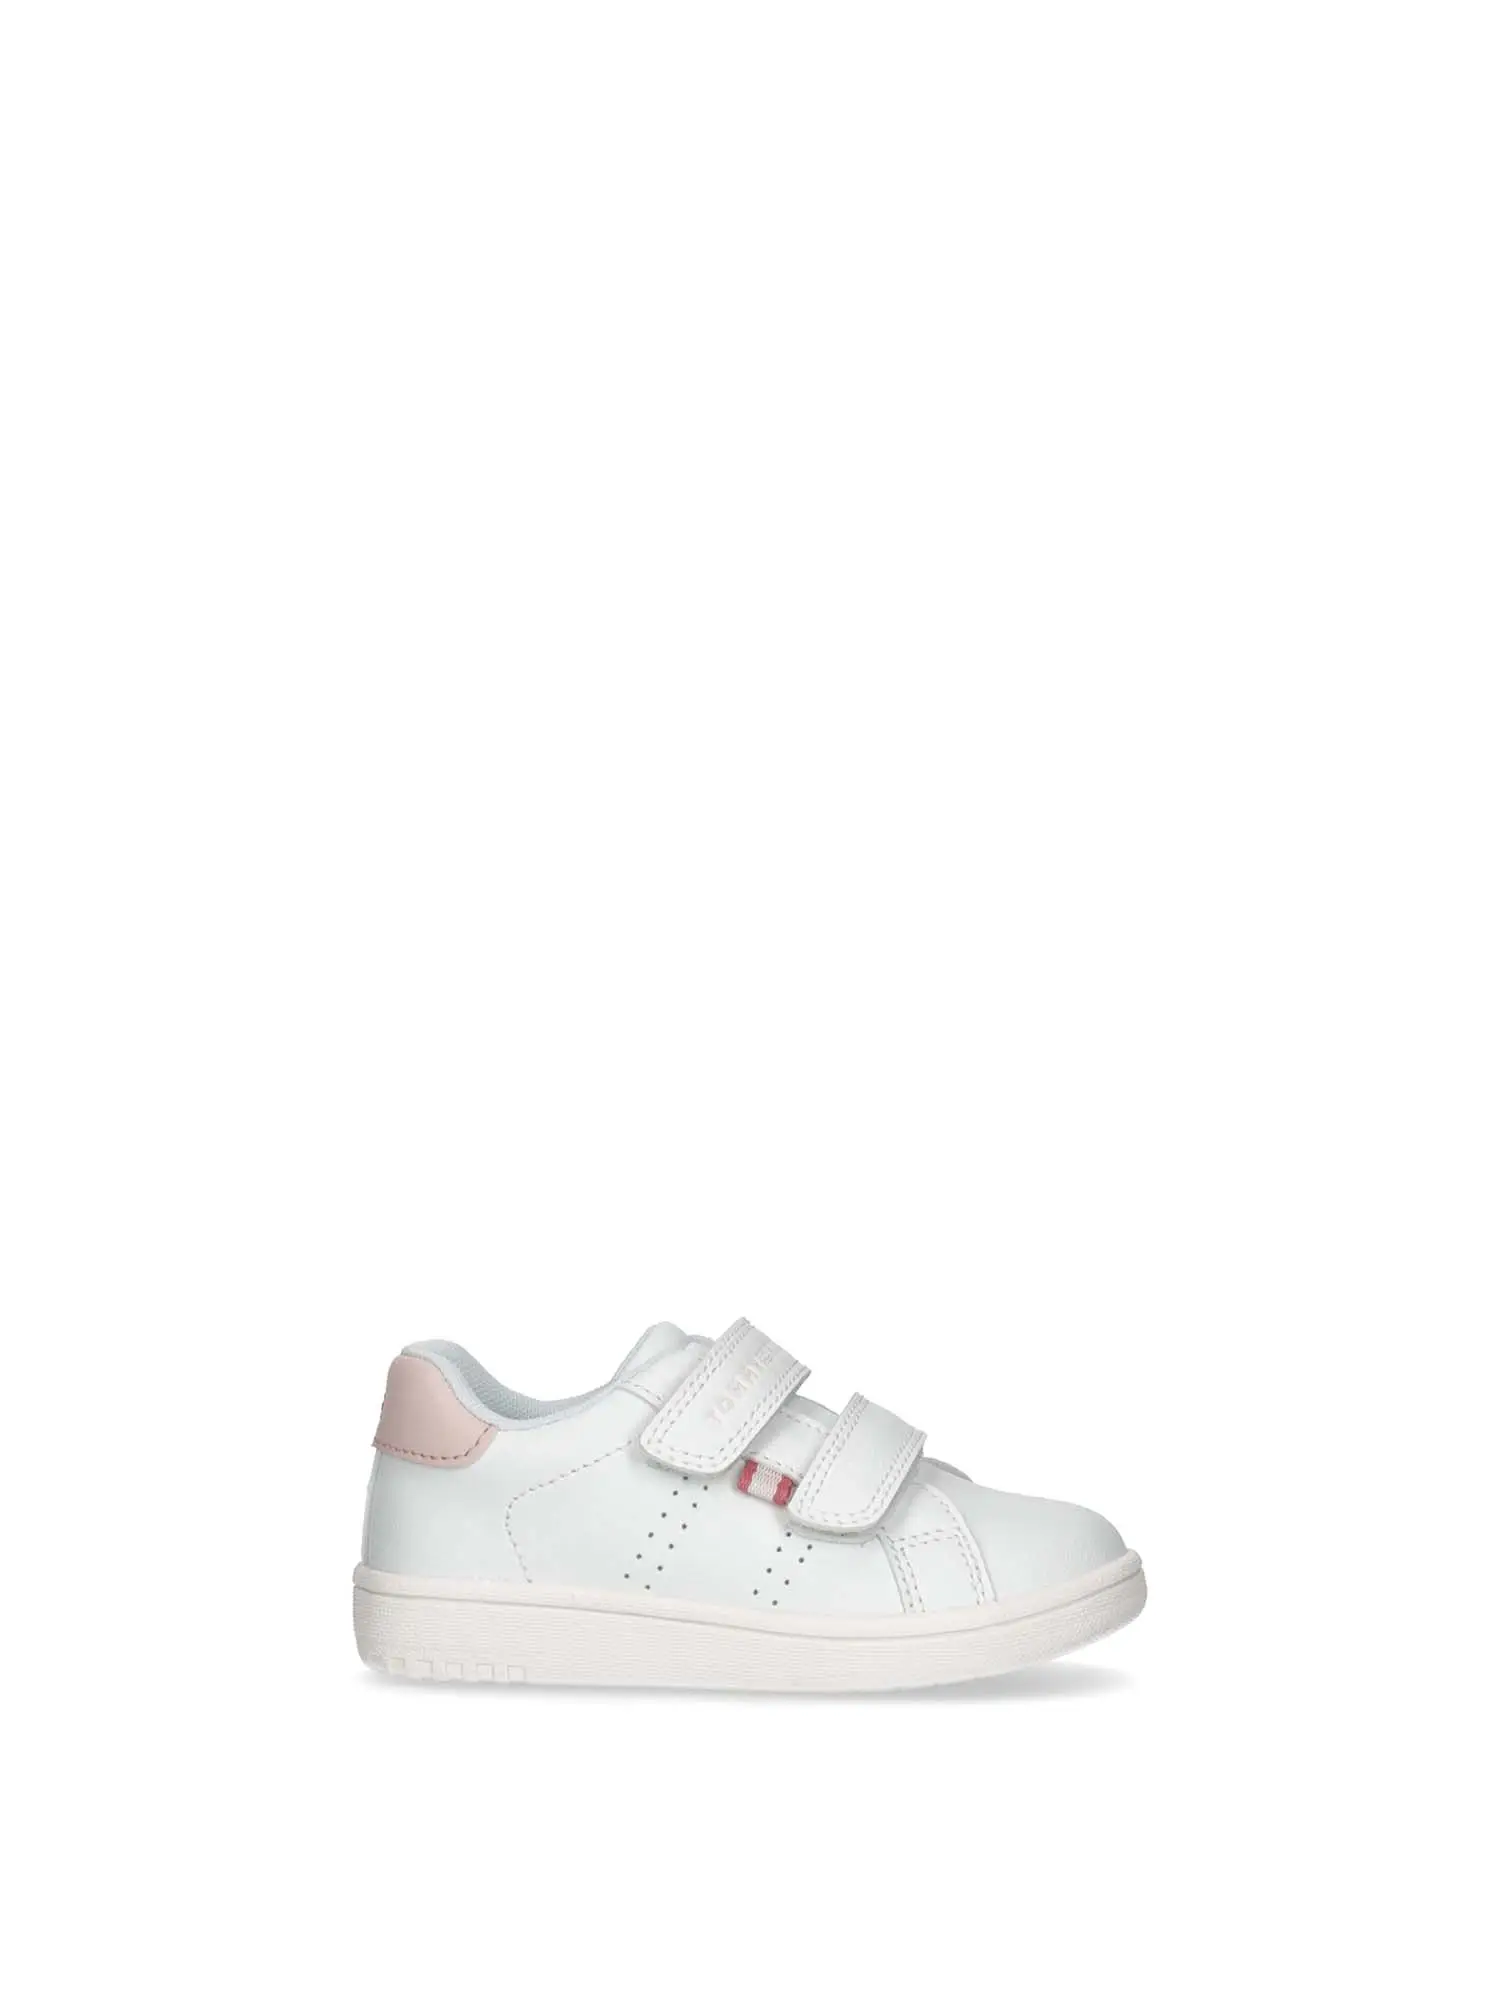 SNEAKERS BAMBINA - TOMMY HILFIGER - T1A9-33195-1355 - BIANCO/ROSA, 22